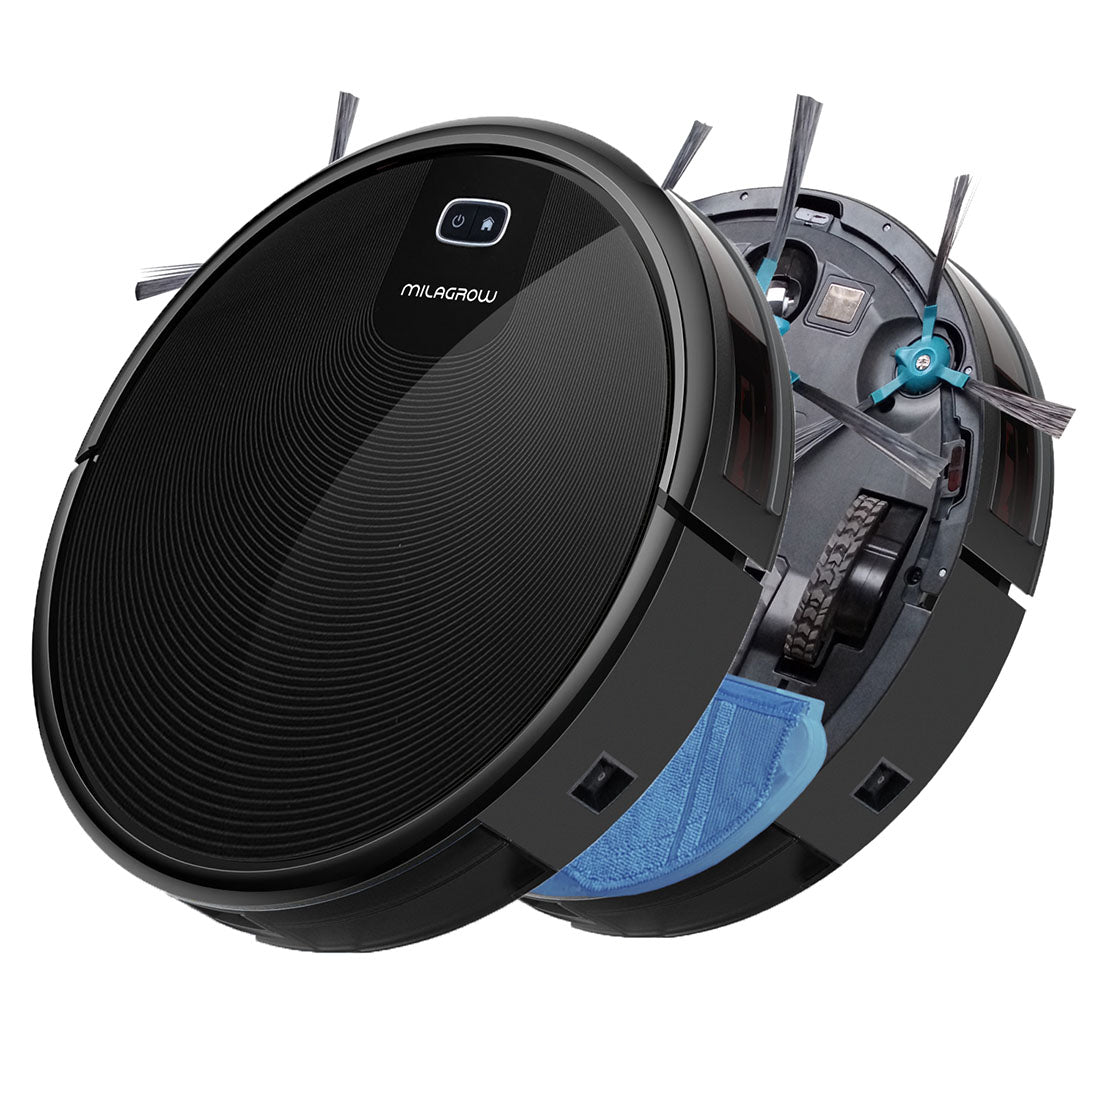 Milagrow BlackCat 21 Full Wet and Dry Robotic Vacuum Cleaner with Water Tank iBoost Suction and Self-Charging